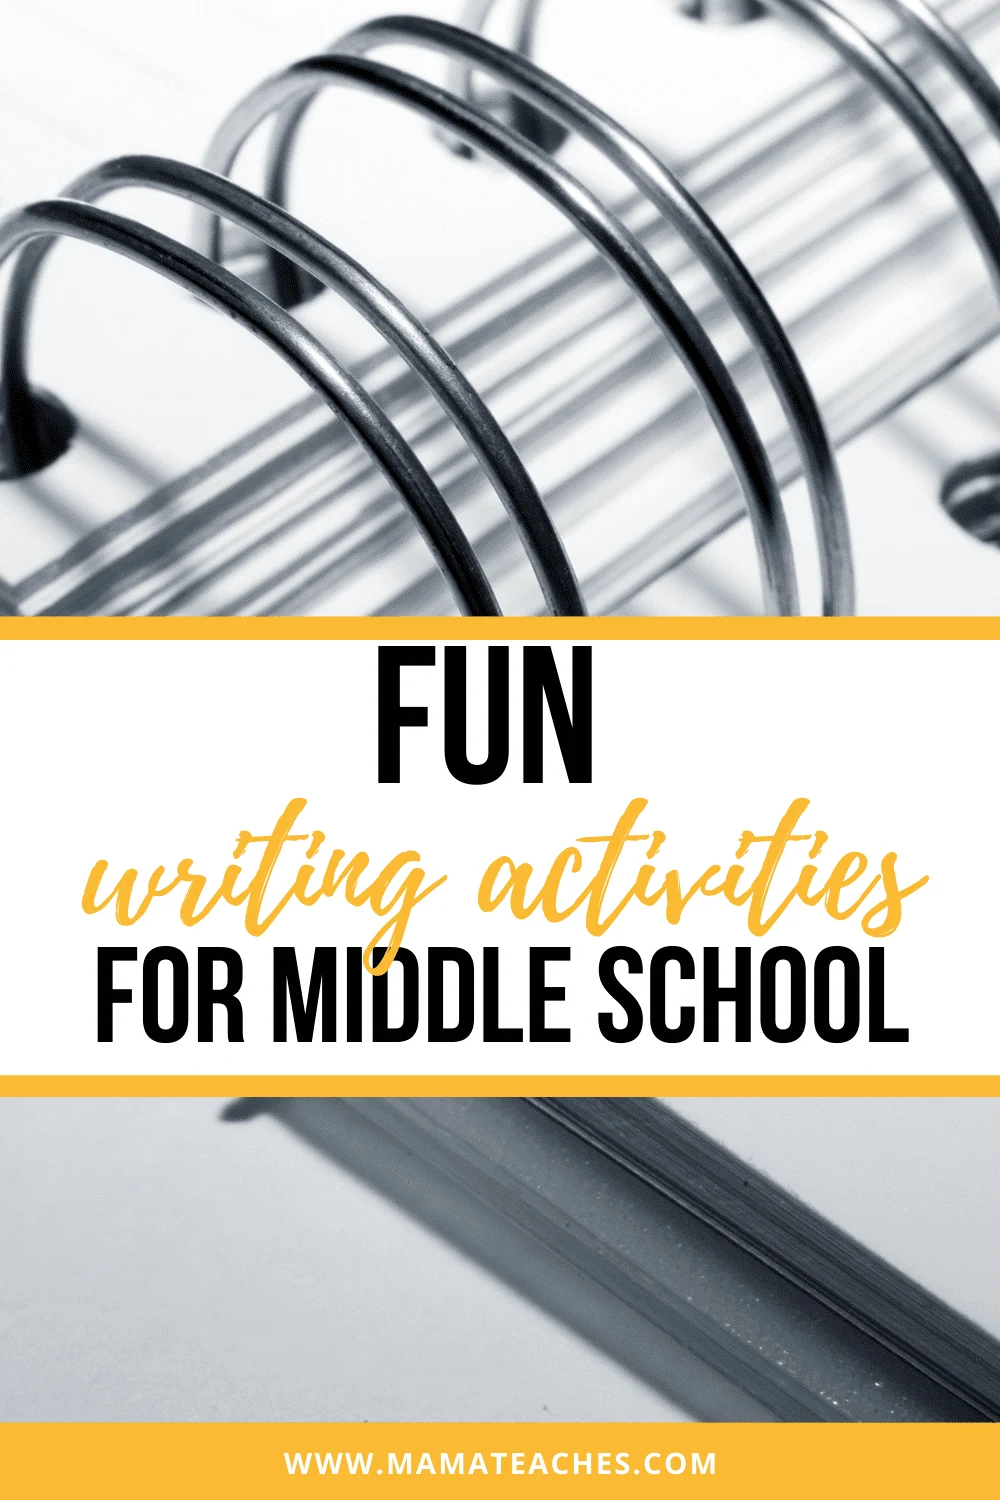 Fun Writing Activities for Middle School